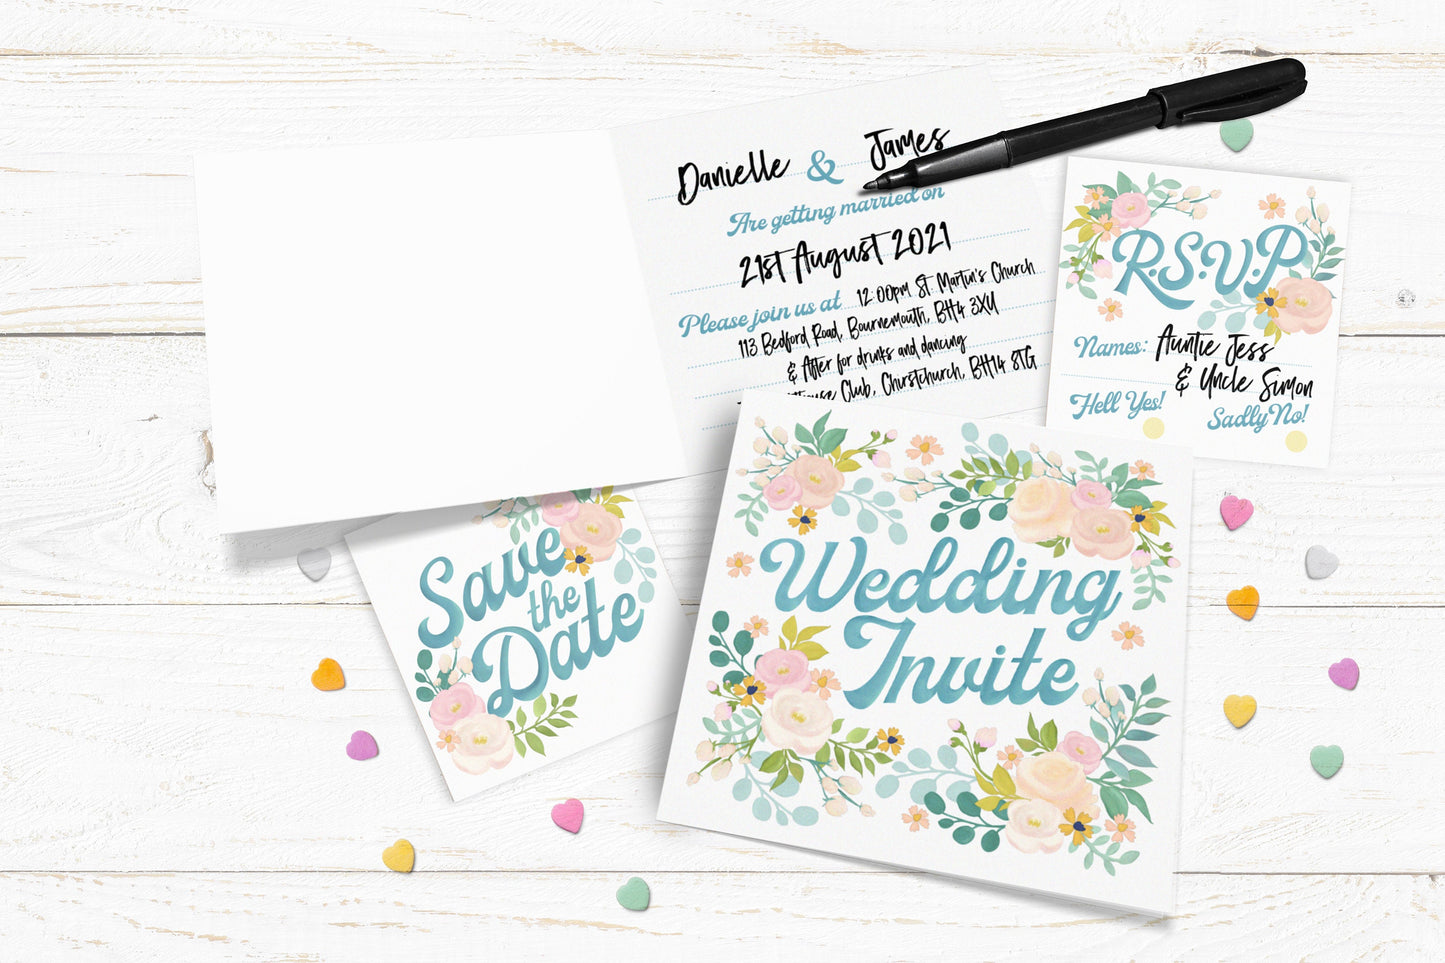 Floral Wedding Invite - Wedding Invite bundle. Pack of 10 Wedding Invite, RSVP, Save the Date and Belly Bands.